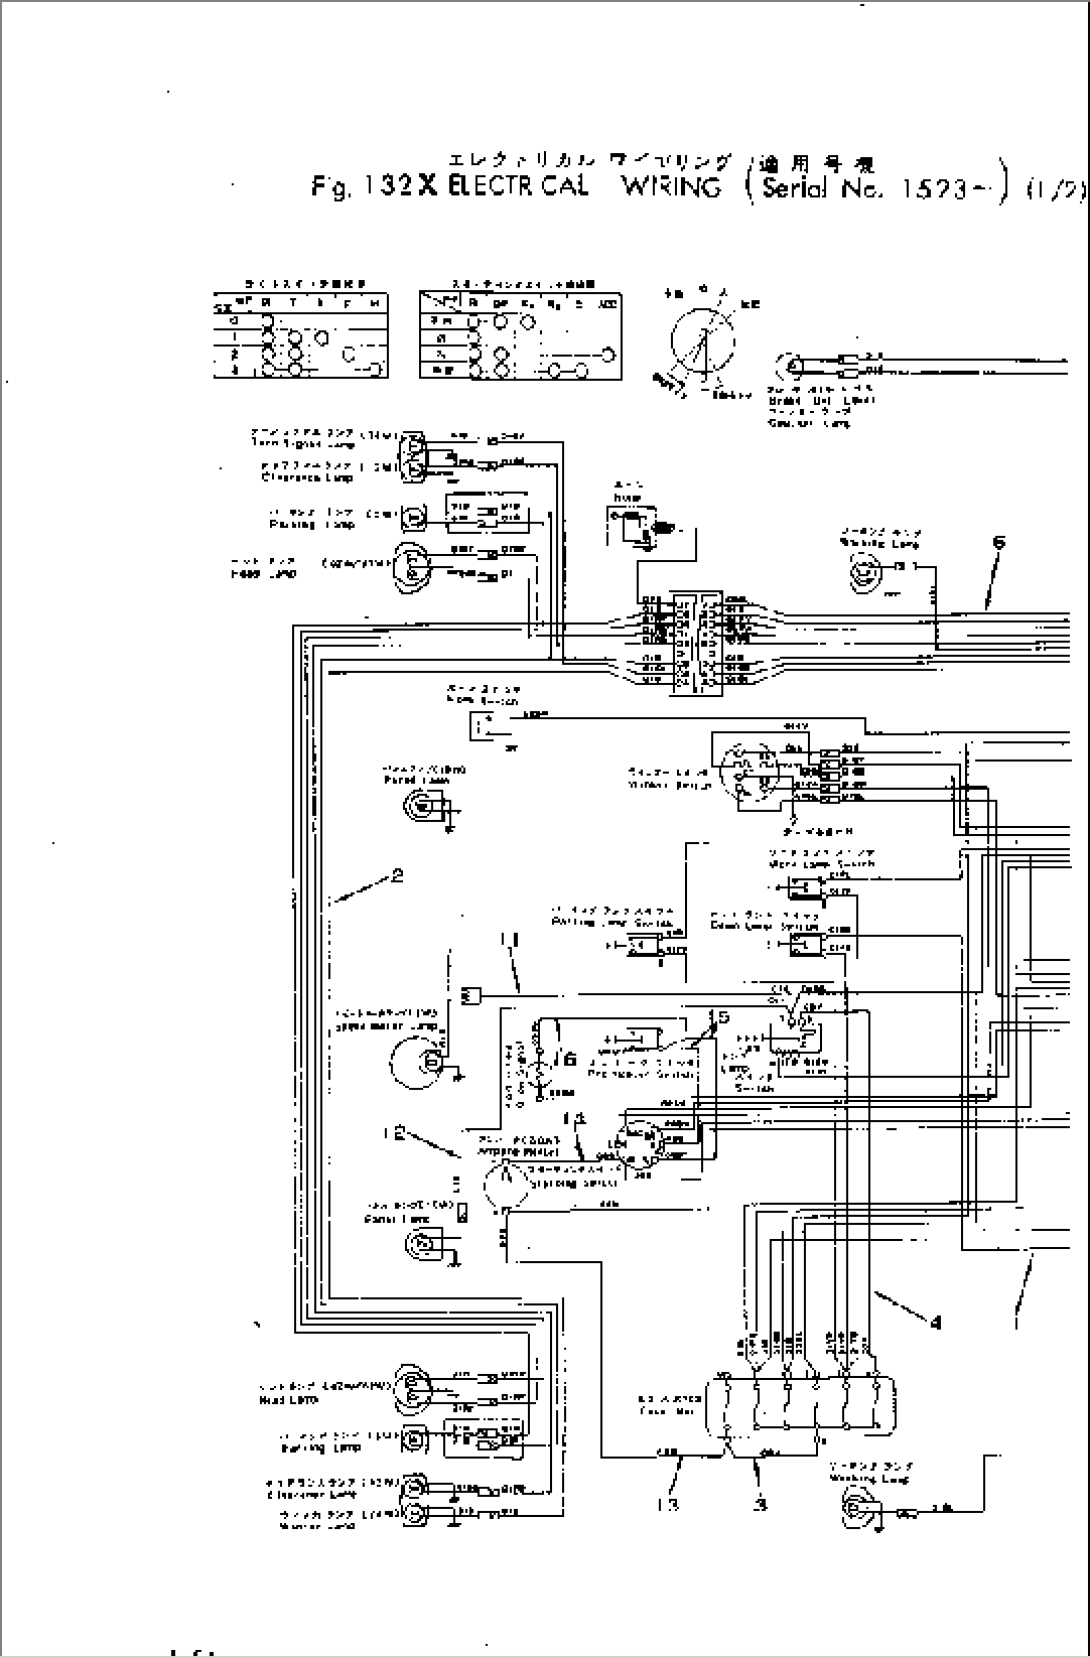 ELECTRICAL WIRING (1/2)(#1523-)